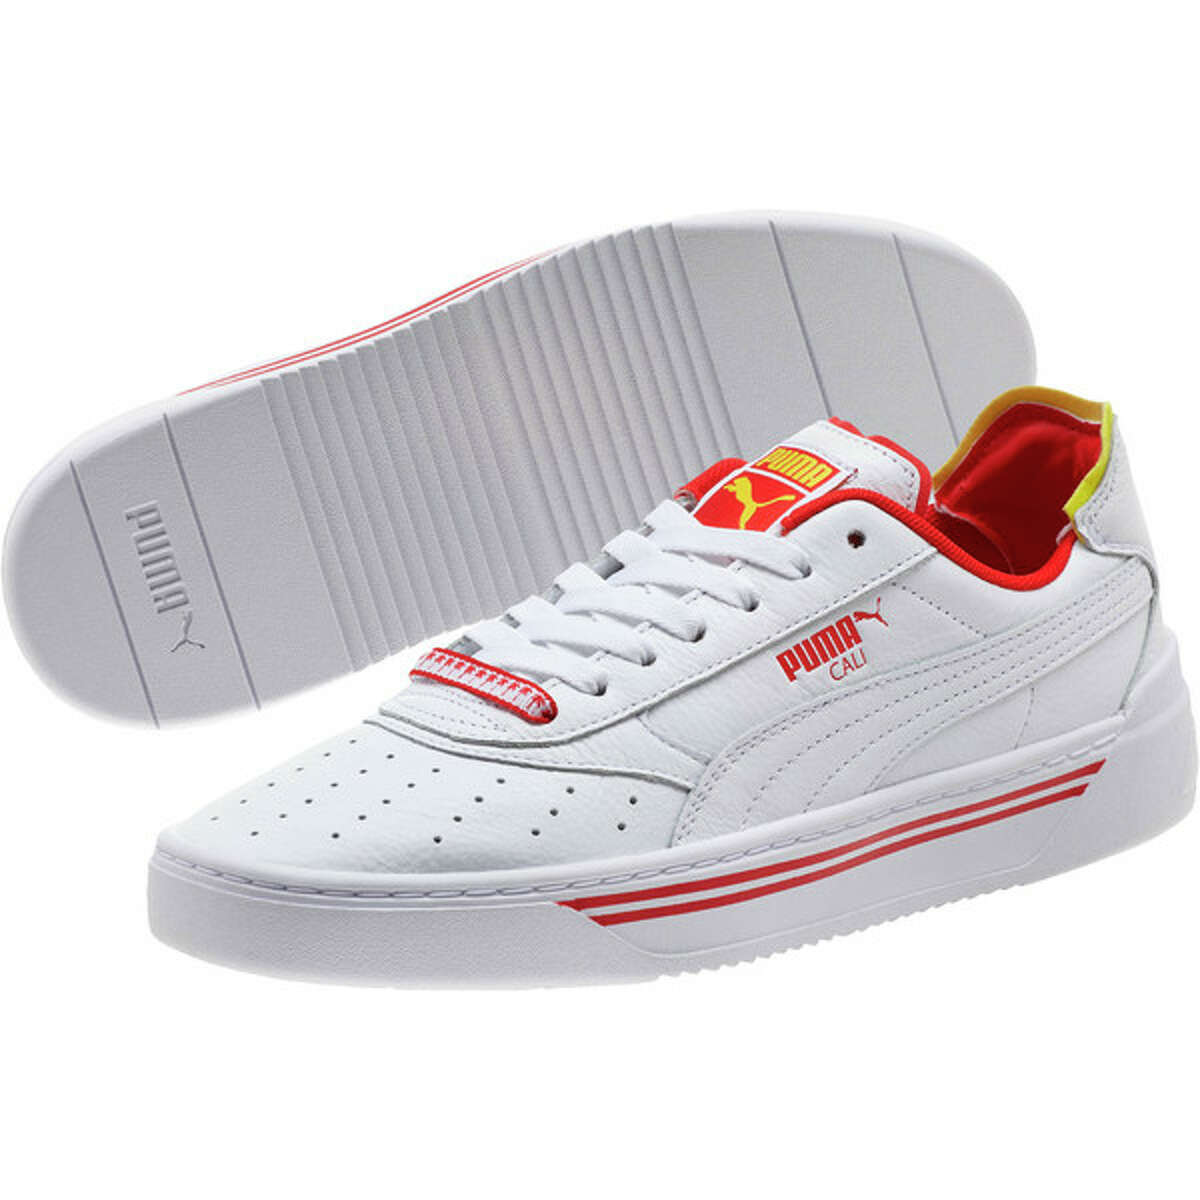 In-N-Out suing Puma over white, red and yellow 'Drive Thru' sneakers